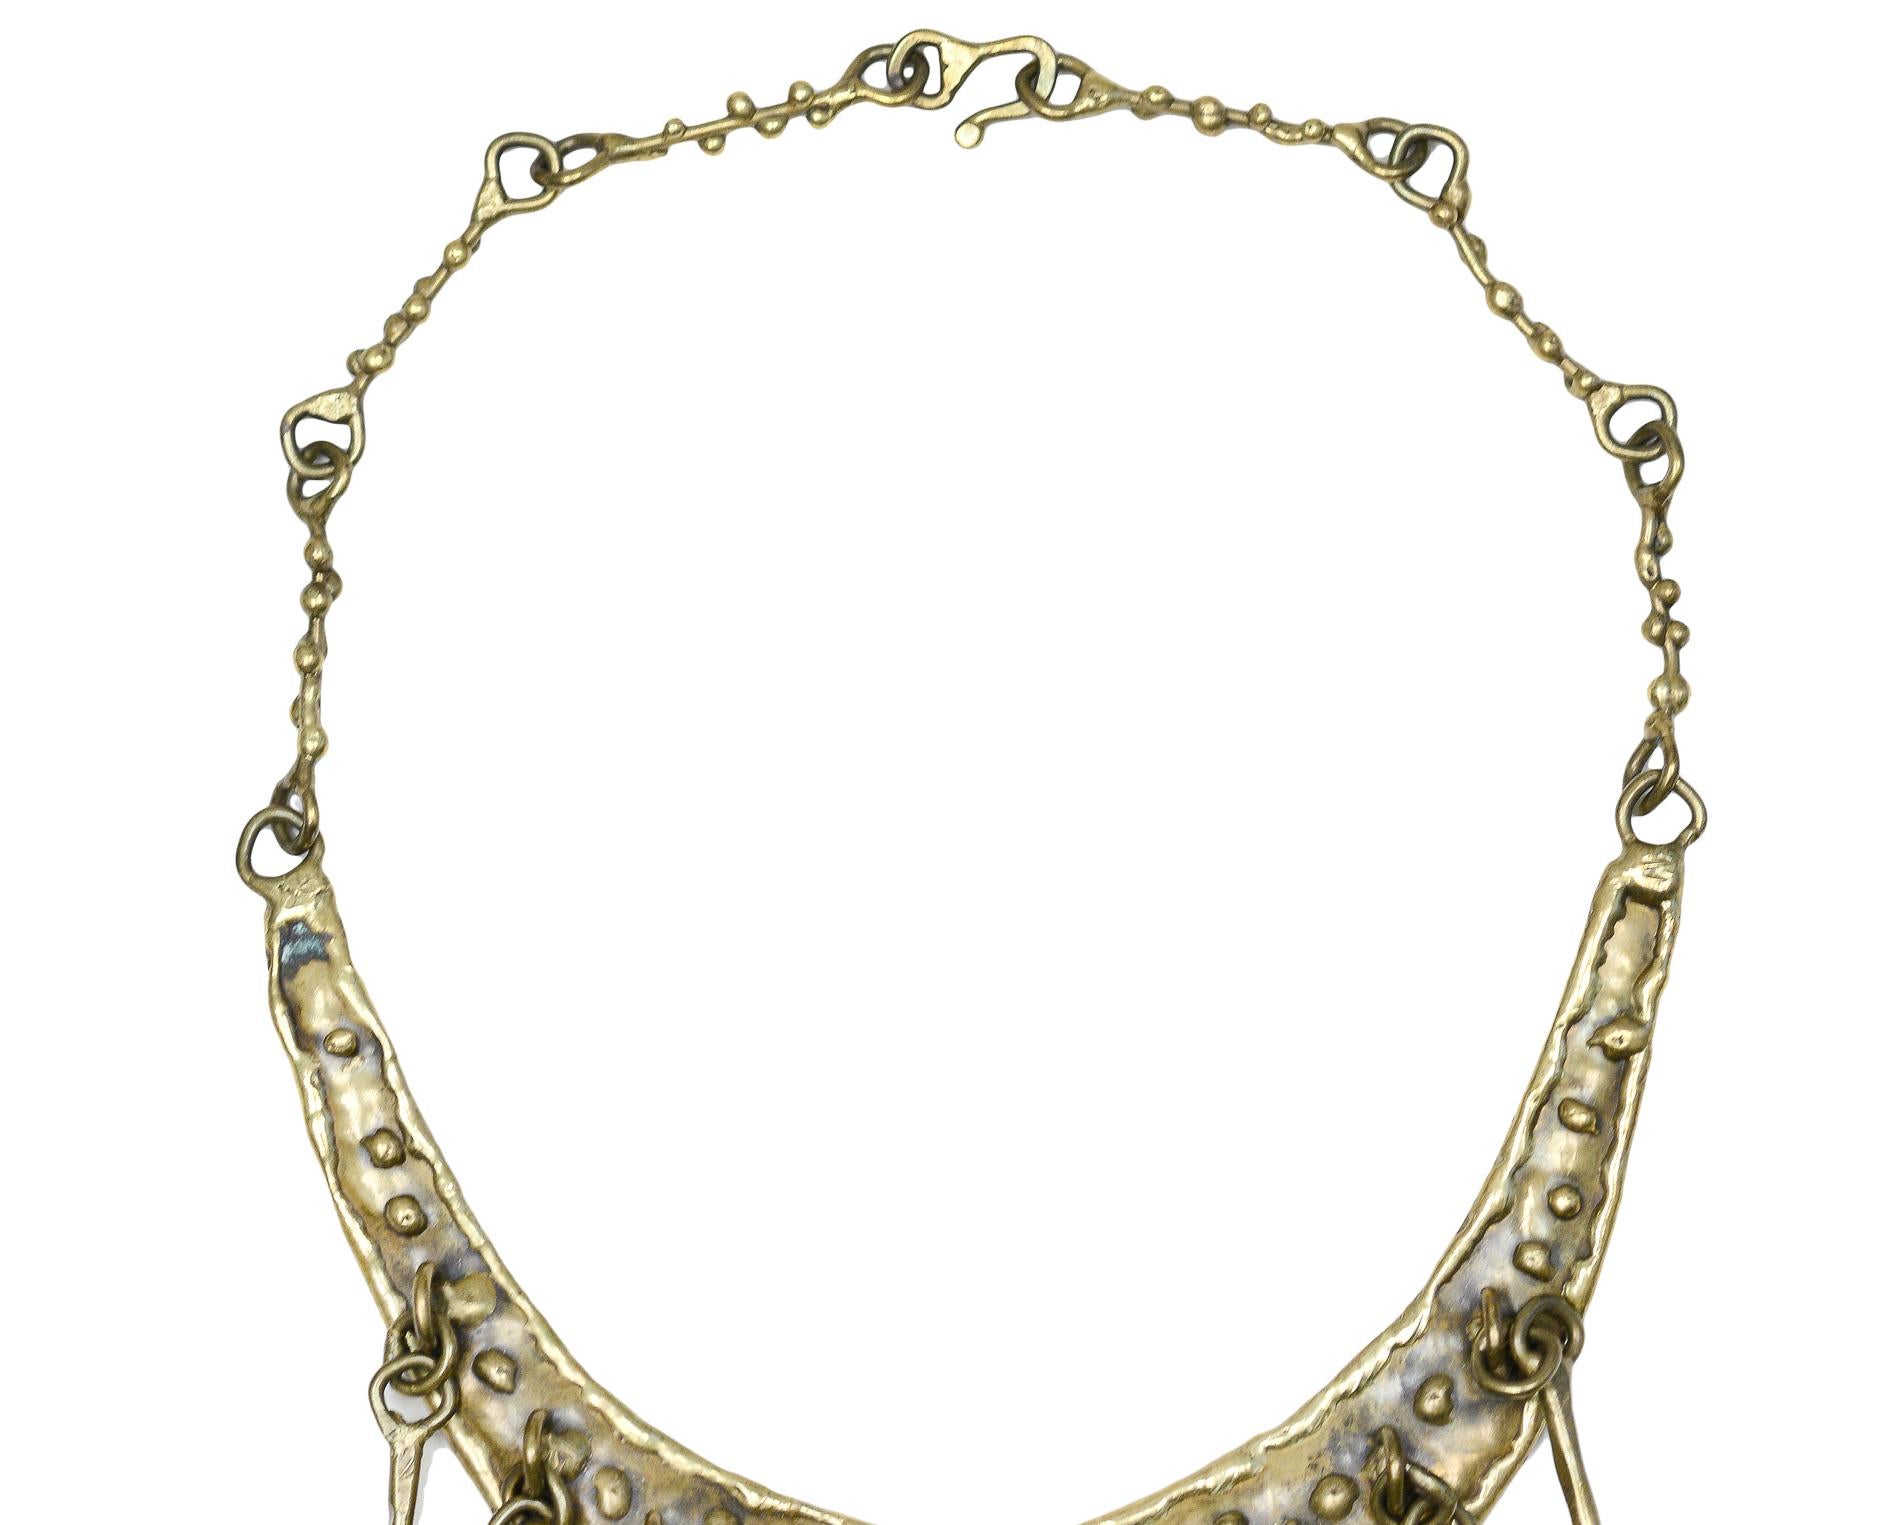 Pal Kepenyes Bronze Fringe Collar Necklace In Excellent Condition For Sale In Los Angeles, CA